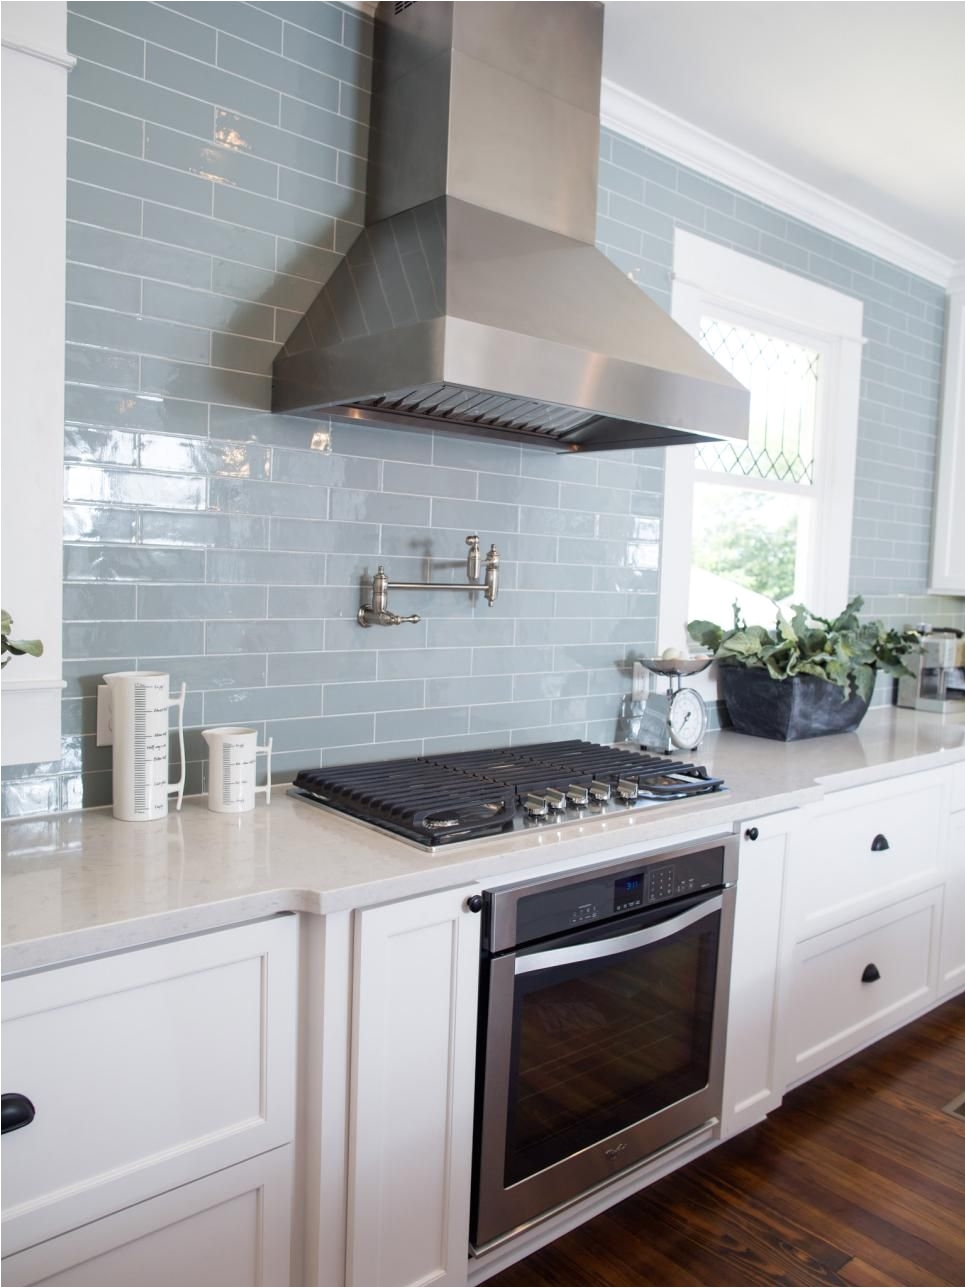 other key features in the new kitchen are stainless steel appliances vent hood and a subway tile backsplash in muted blue a favorite color of homeowner